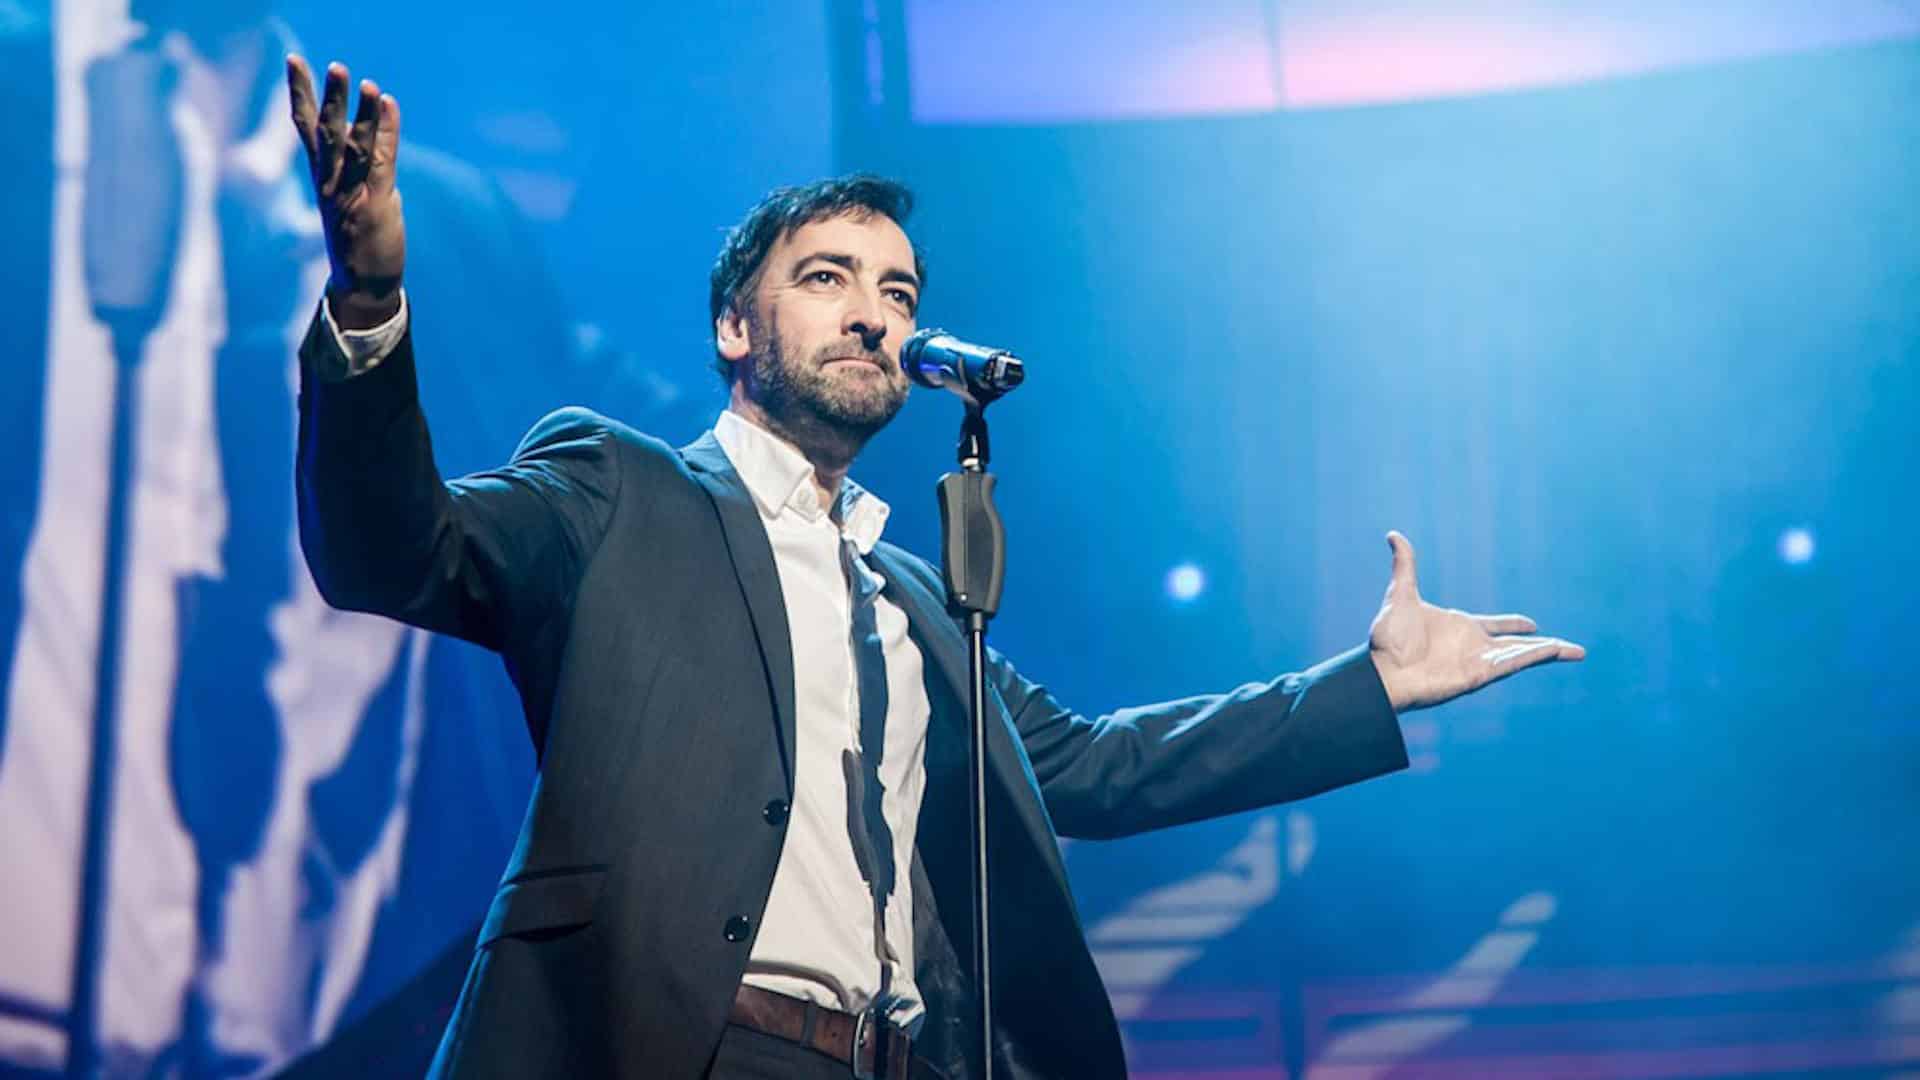 Alistair McGowan on stage during 'The Piano Show'